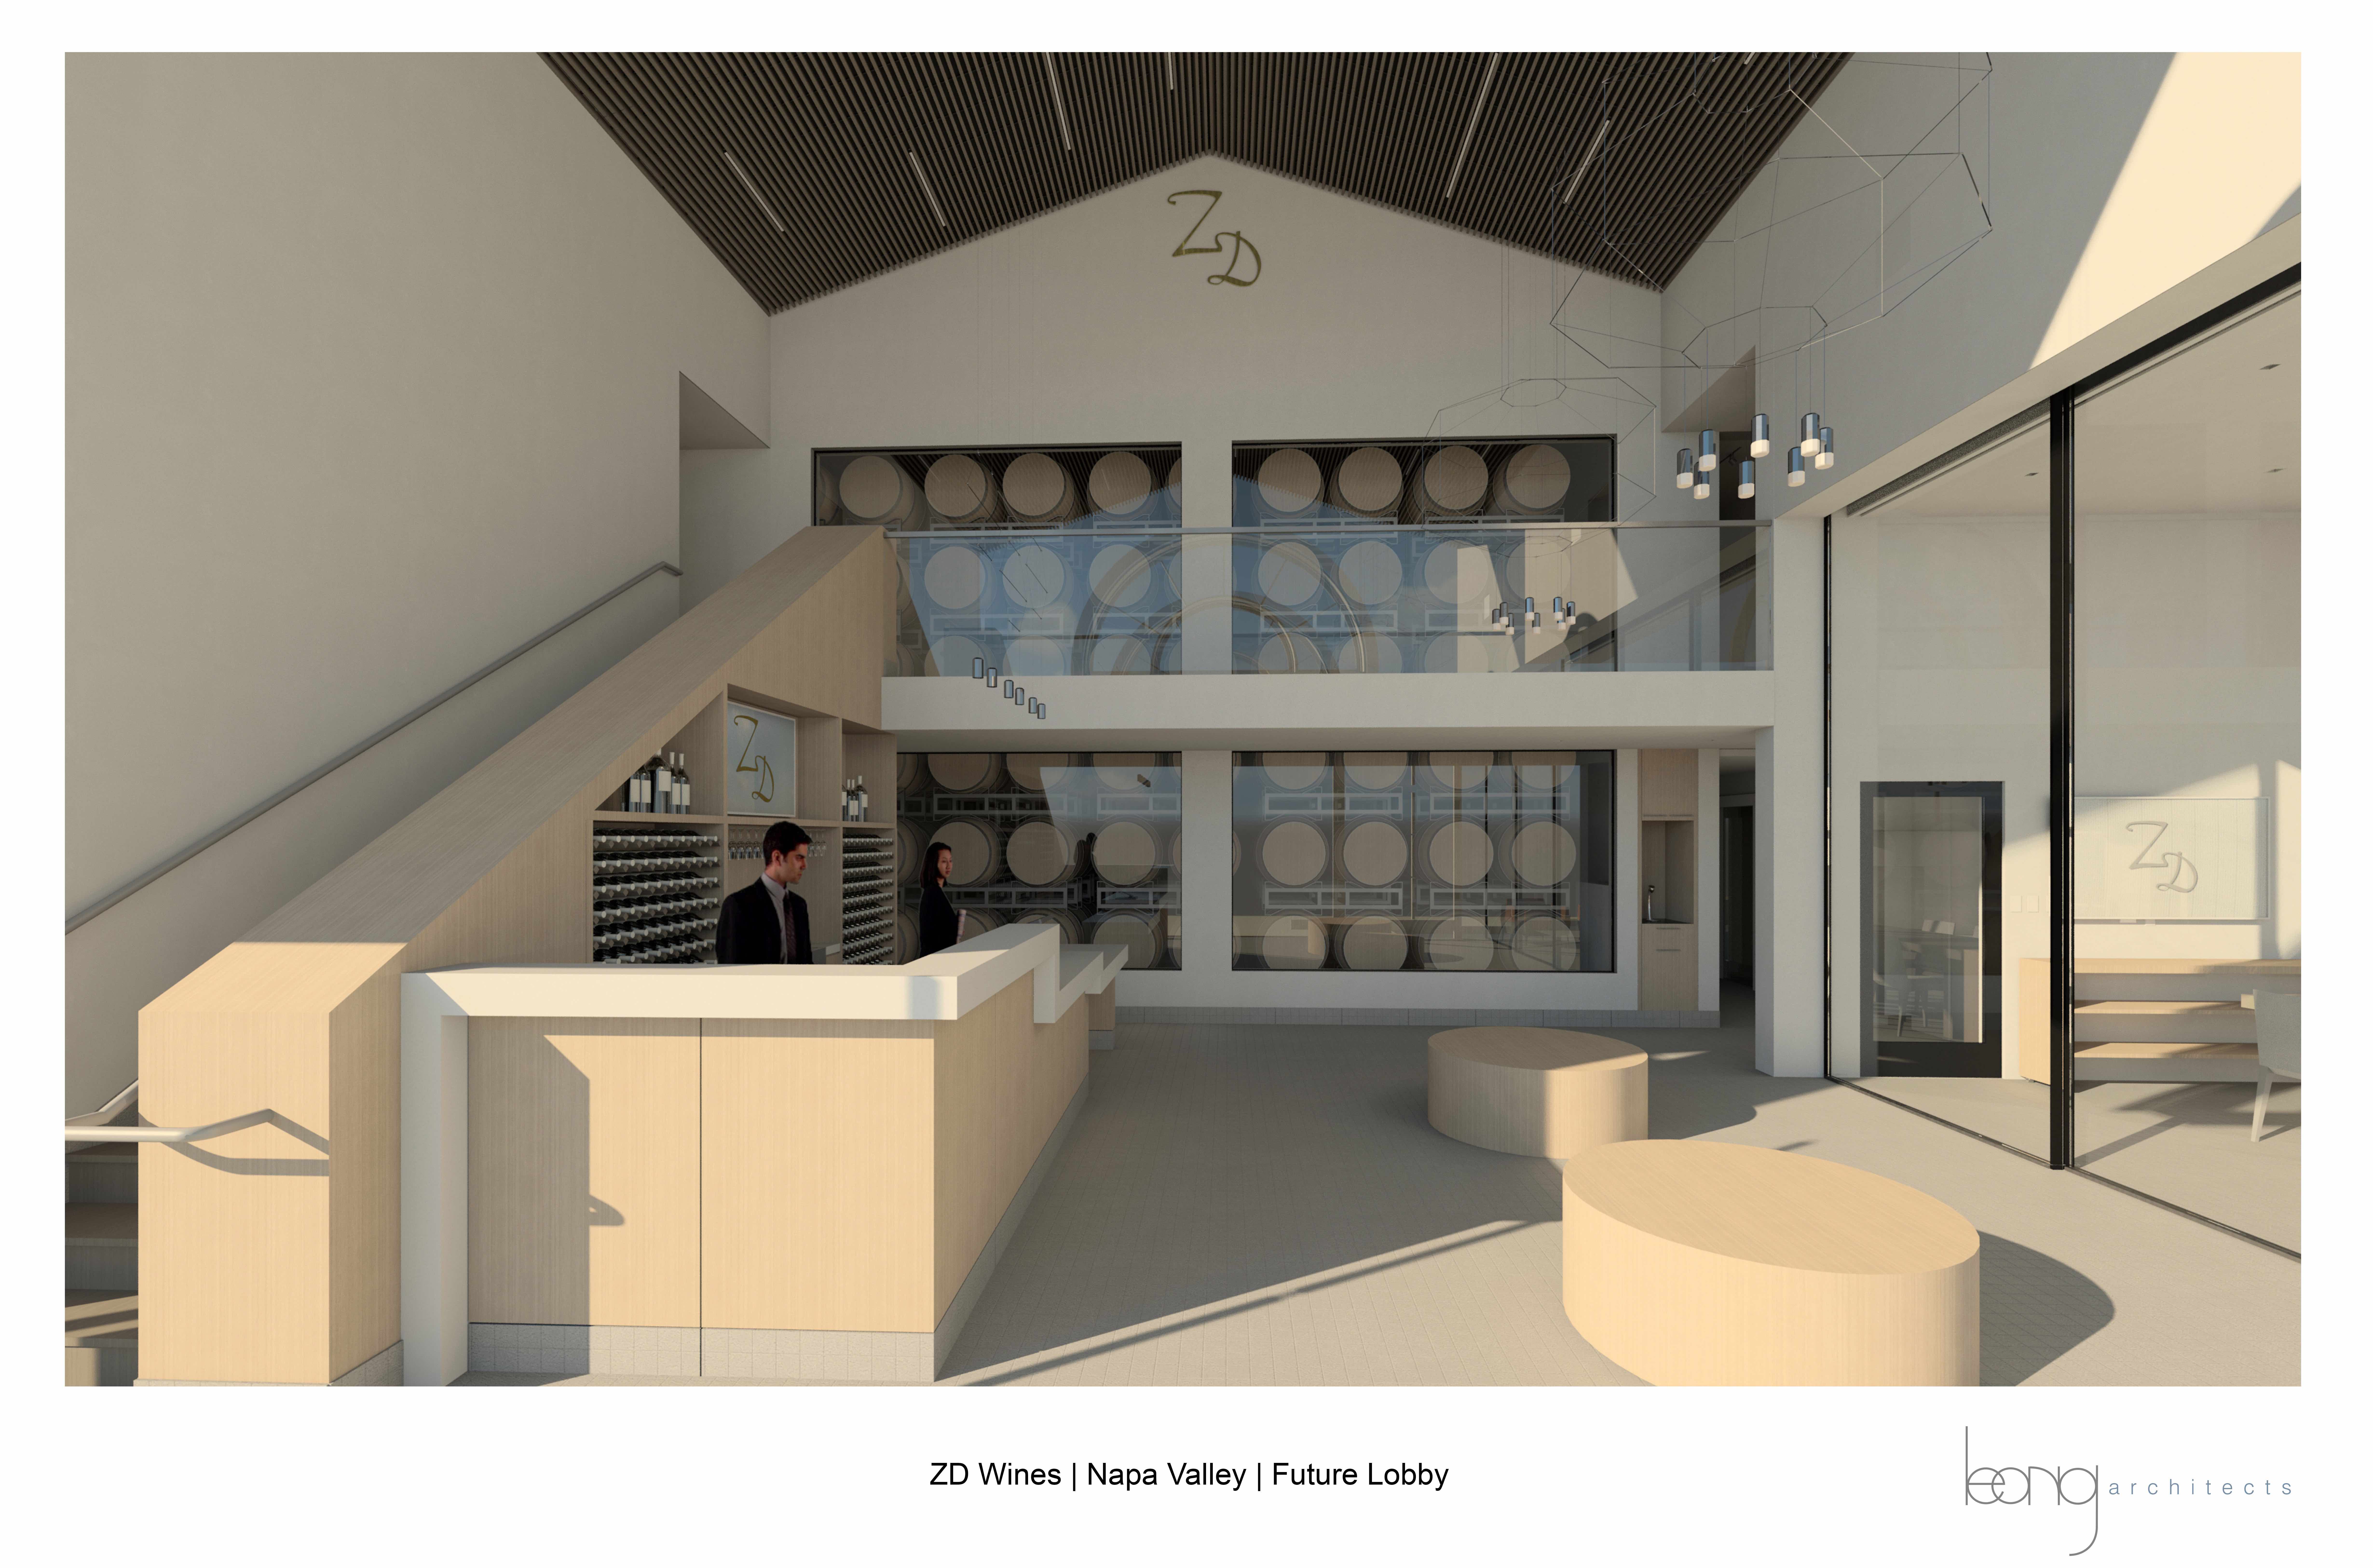 The reception area and private lounge comprise the next renovation phase and will open in the spring of 2019.